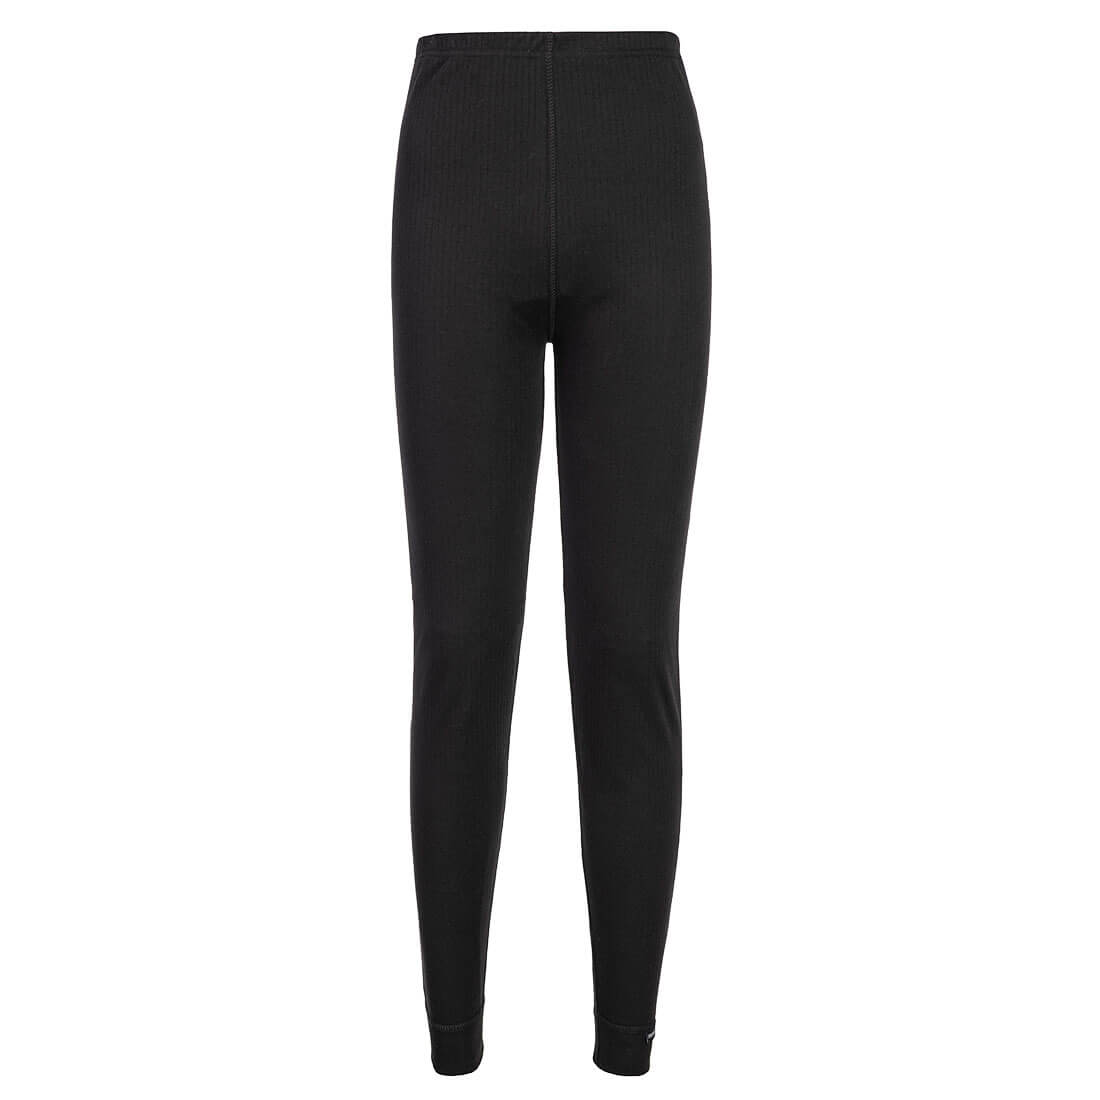 Portwest B125 - Women's Thermal Trousers